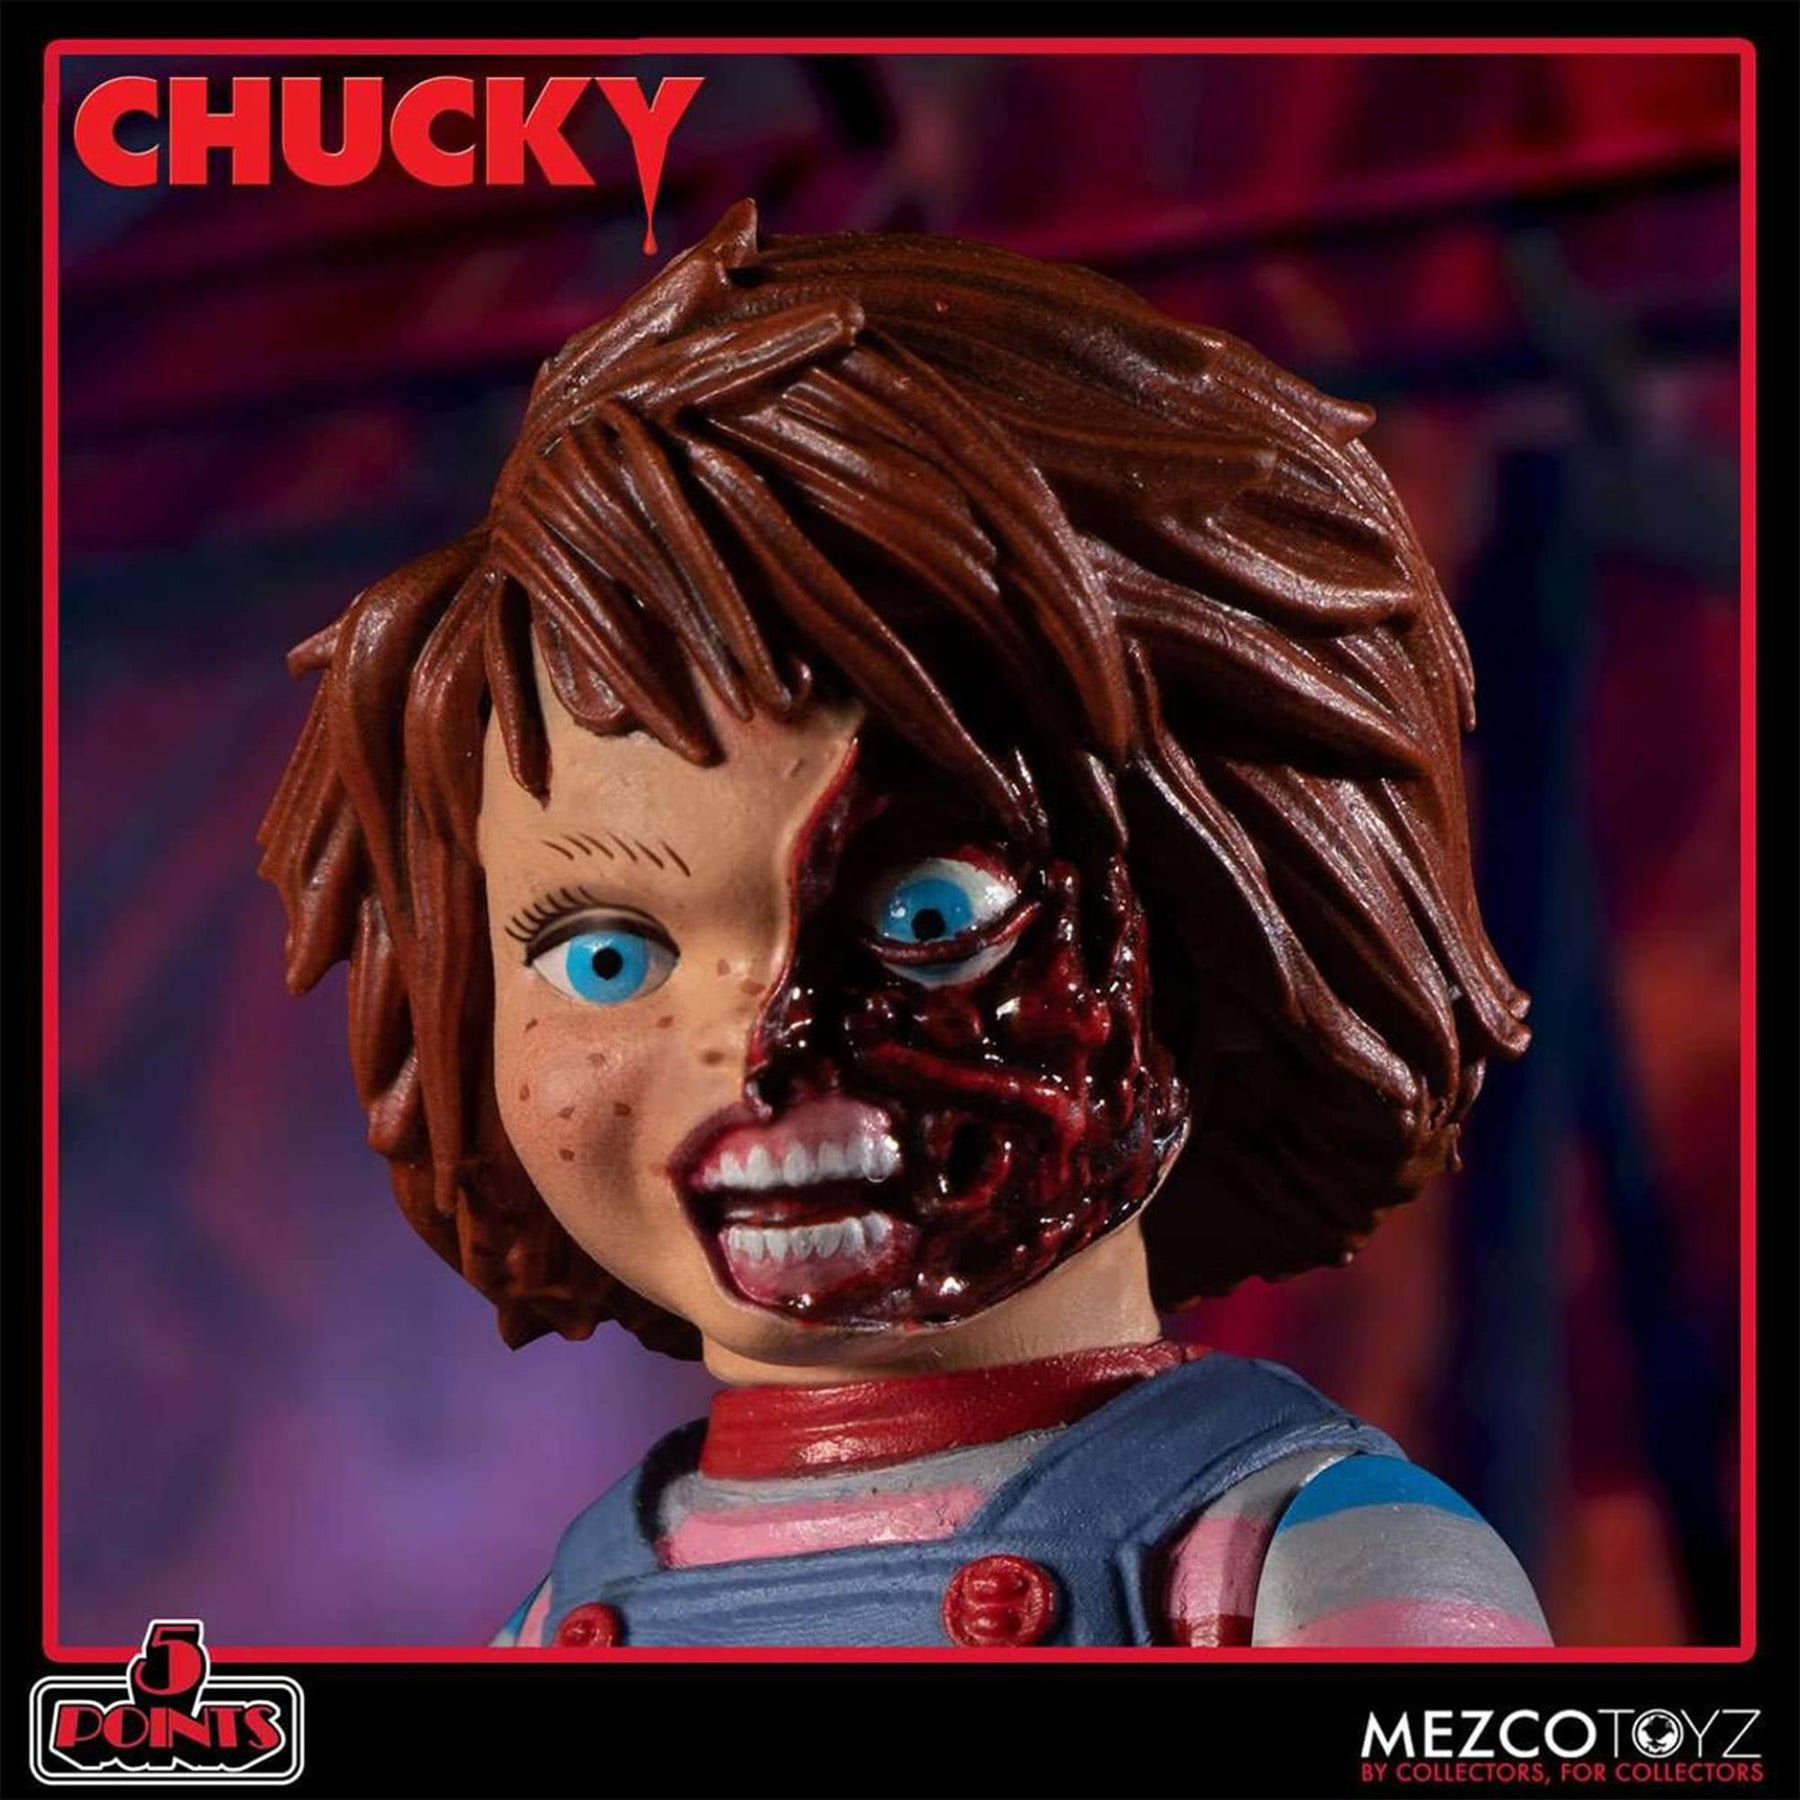 Child's Play Chucky Deluxe 5 Point Figure Set